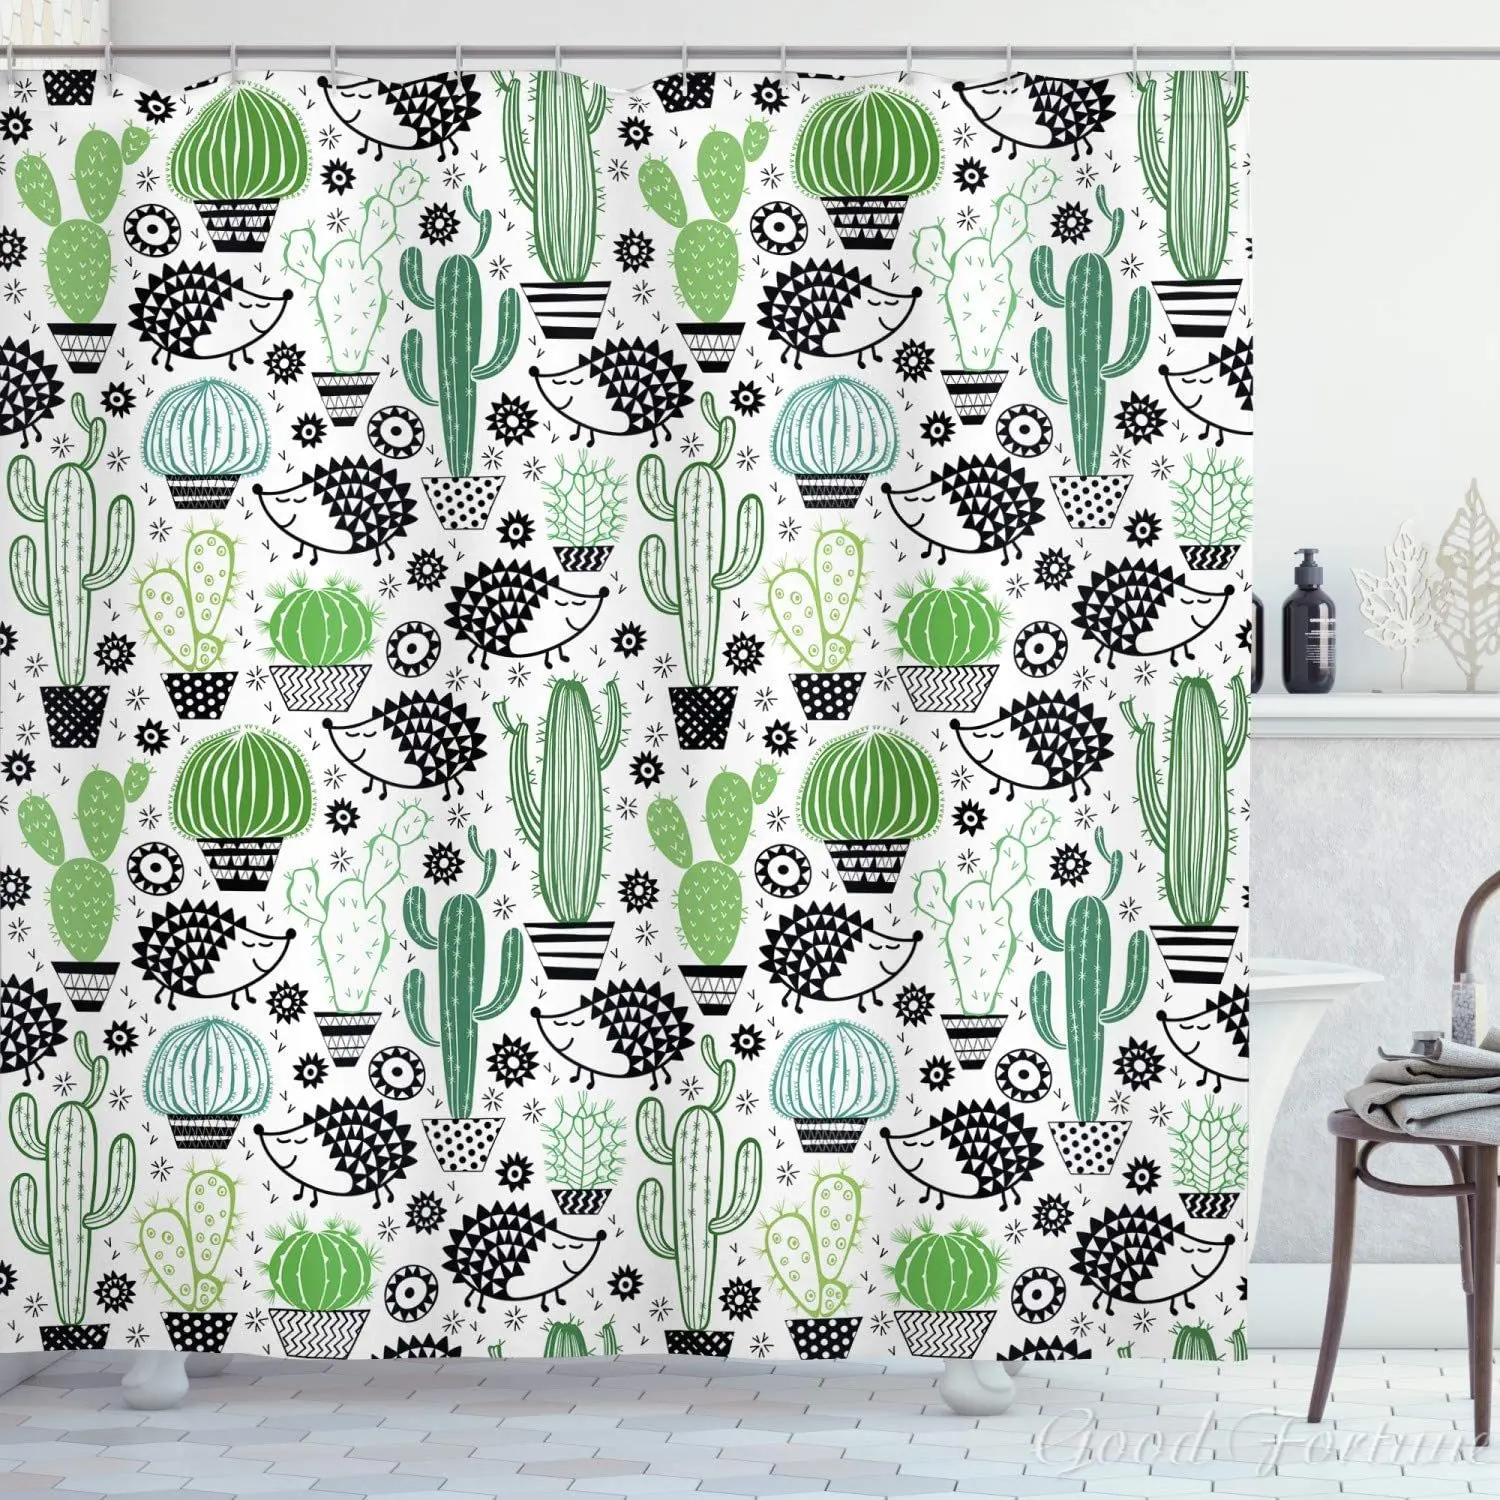 

Cactus Shower Curtain Cartoon Style Inspired Drawing Of Hedgehog Animals Saguaro And Prickly Pear Bathroom Decor Set With Hooks